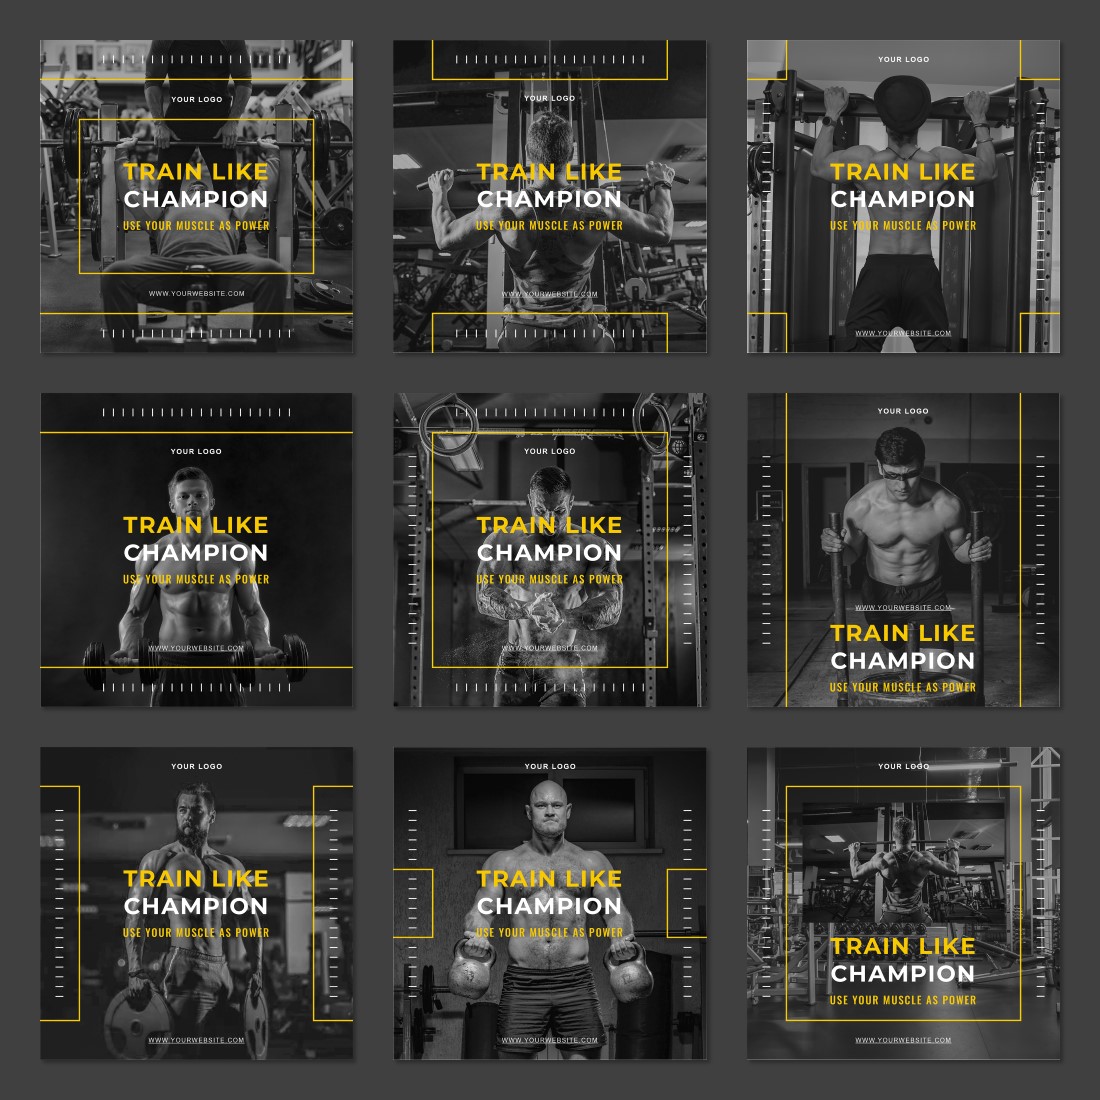 Workout Social Media Post Templates created by sigma studio.